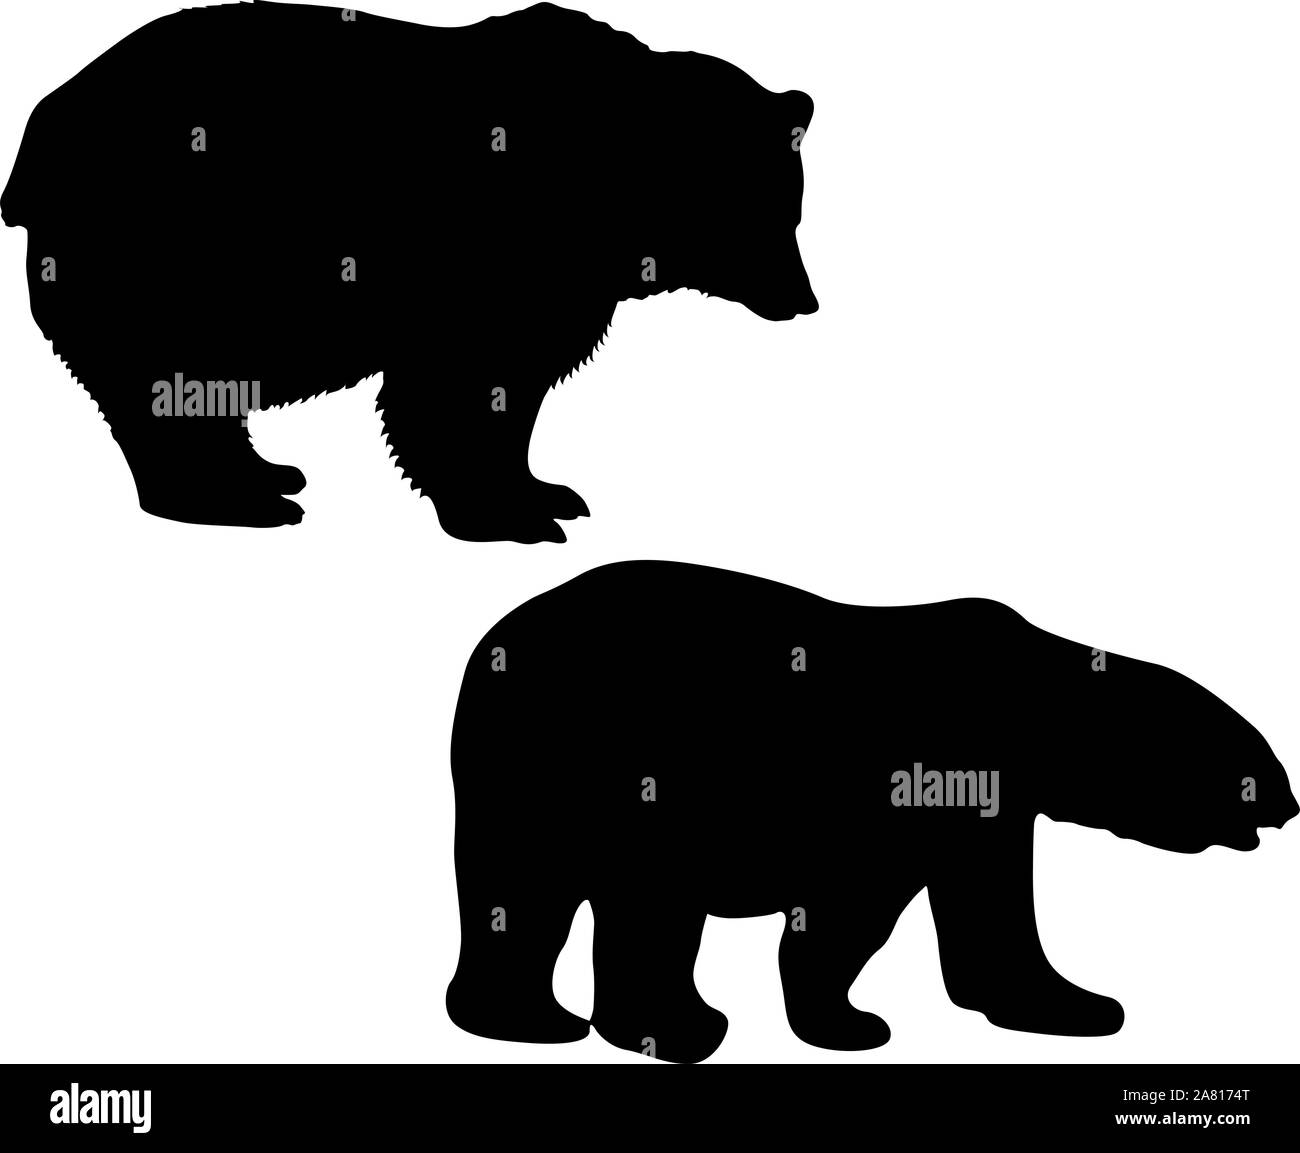 Silhouette of a white and brown bear on a white background. Stock Vector